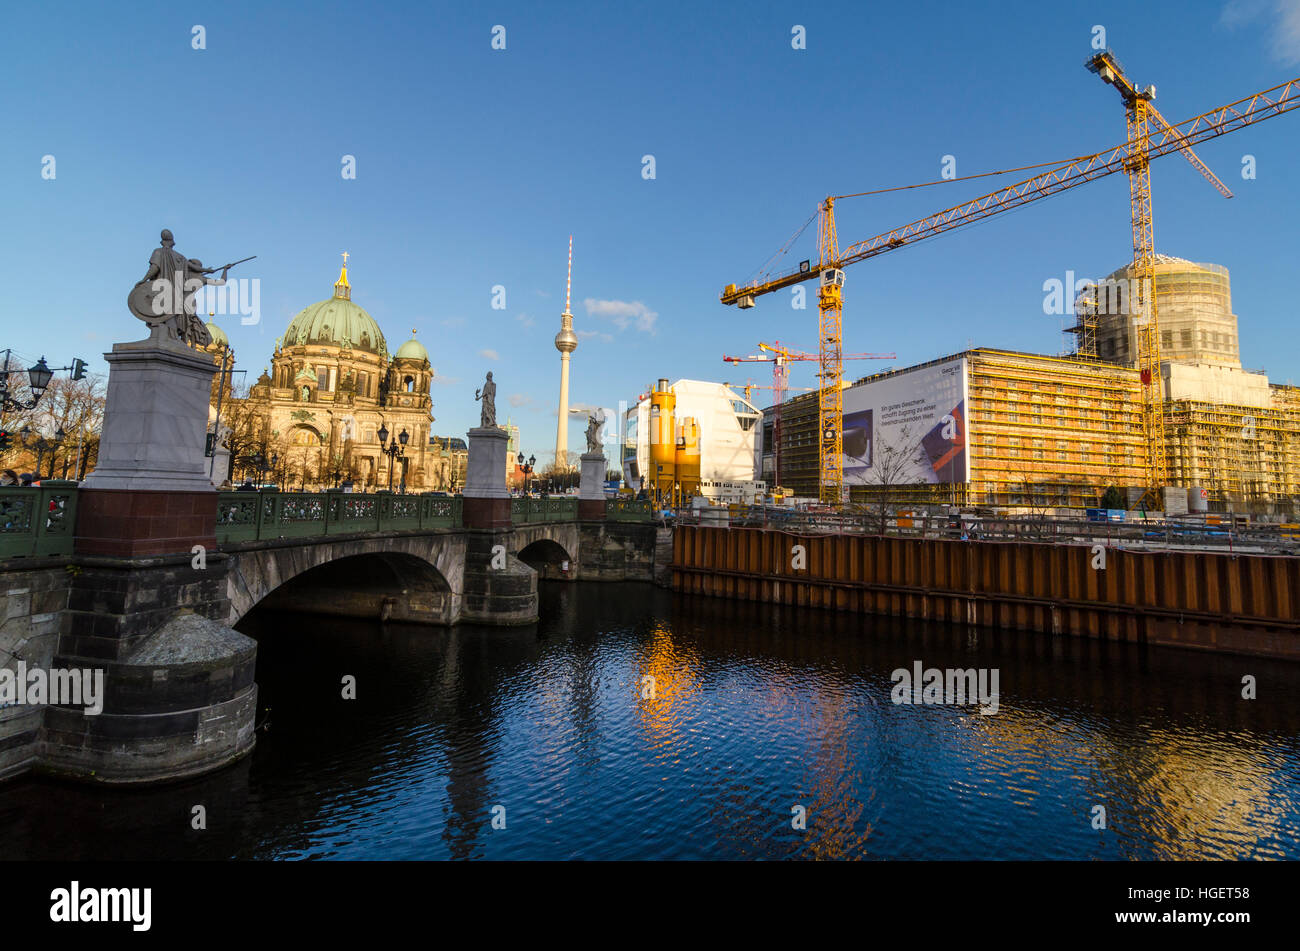 Construction work in Berlin, Germany for the new Berlin City Palace / Berliner Stadtschloss Stock Photo